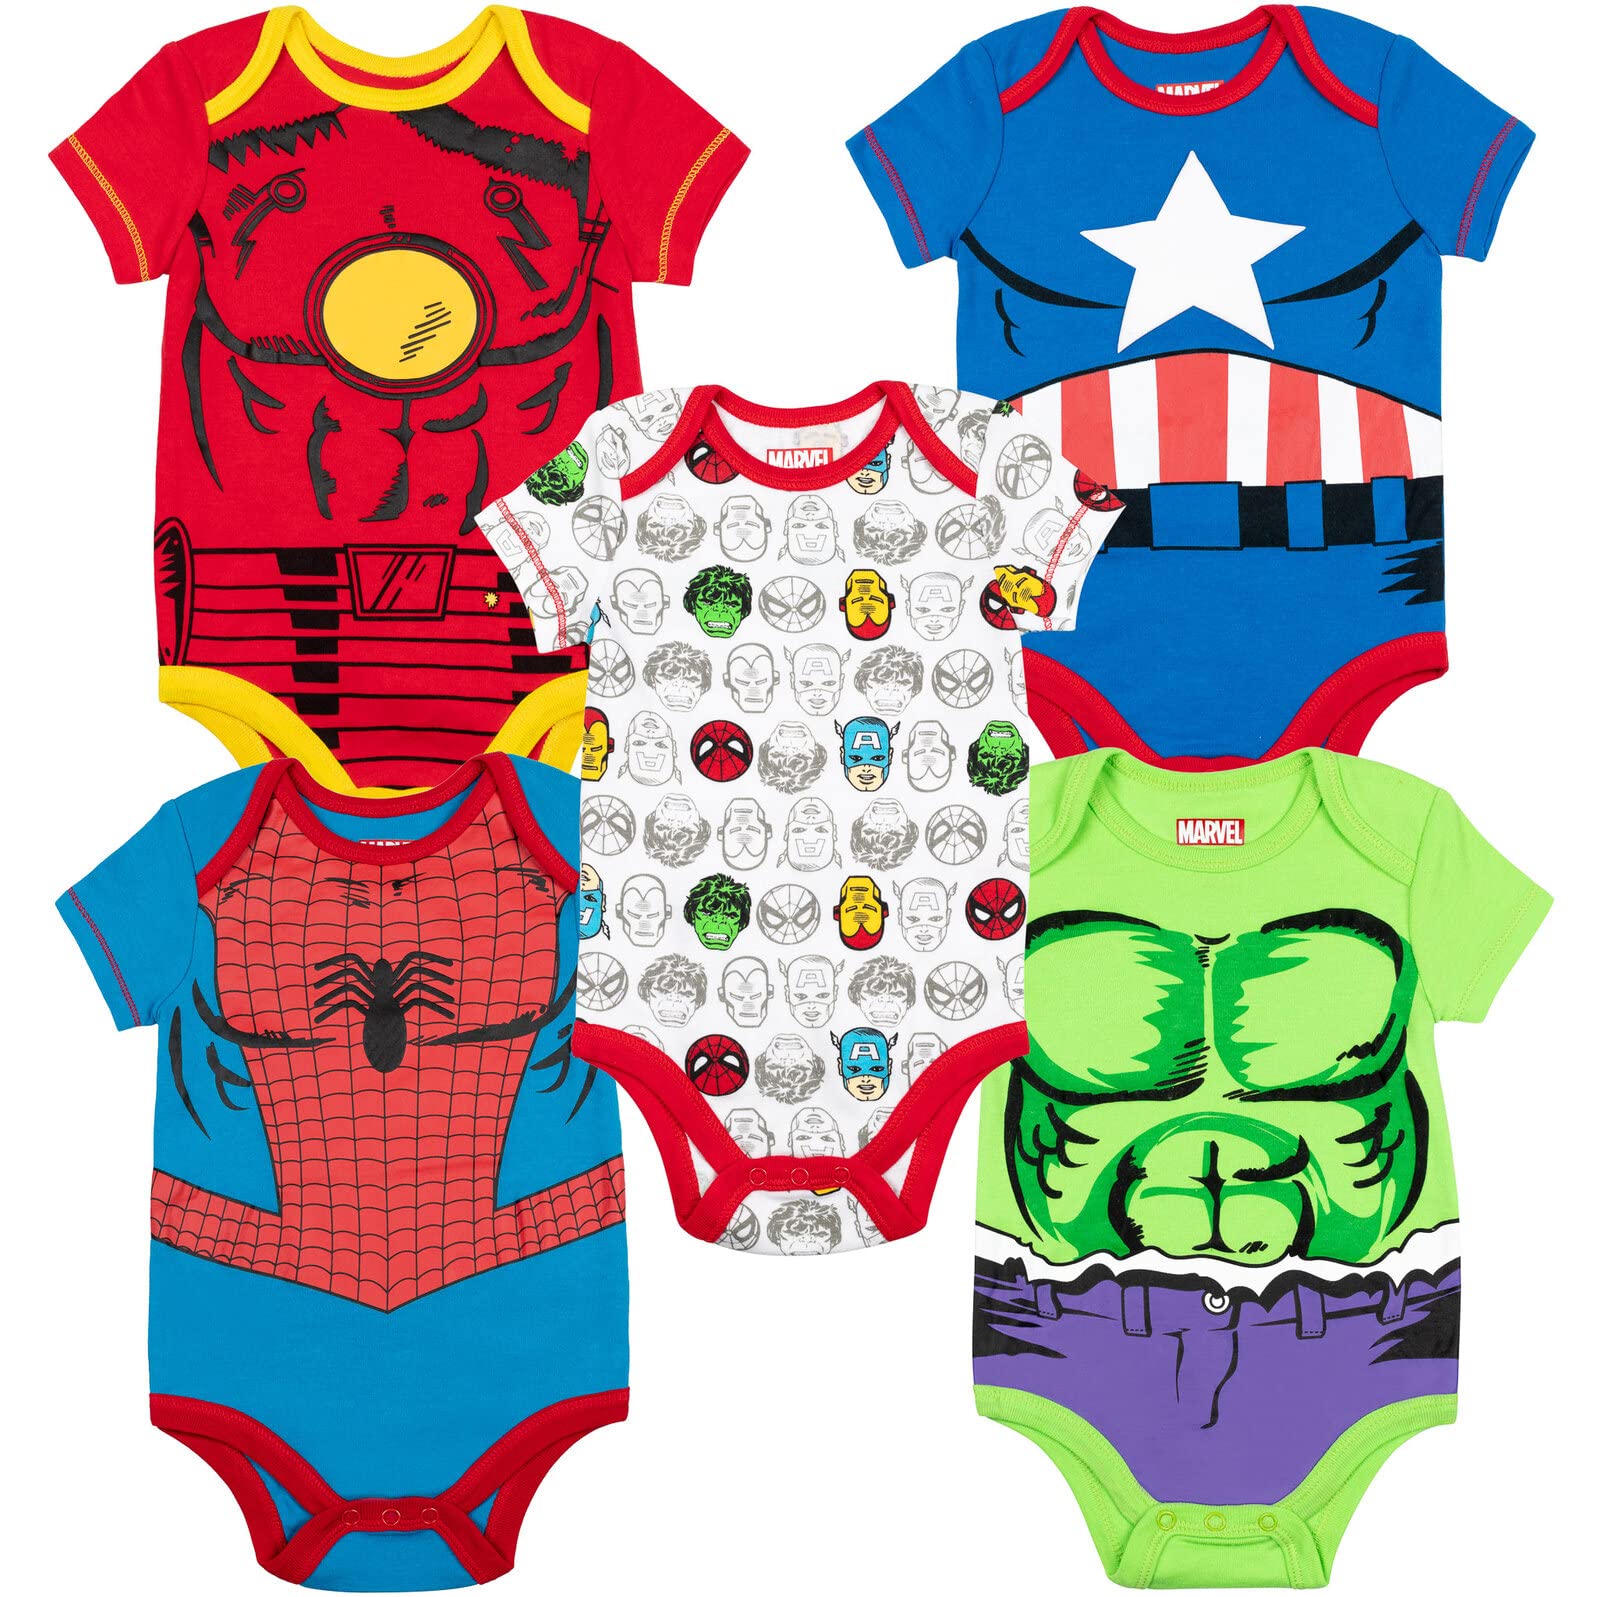 Marvel Baby Boys' 5 Pack Onesies - The Hulk, Spiderman, Iron Man and Captain America (3-6 Months)